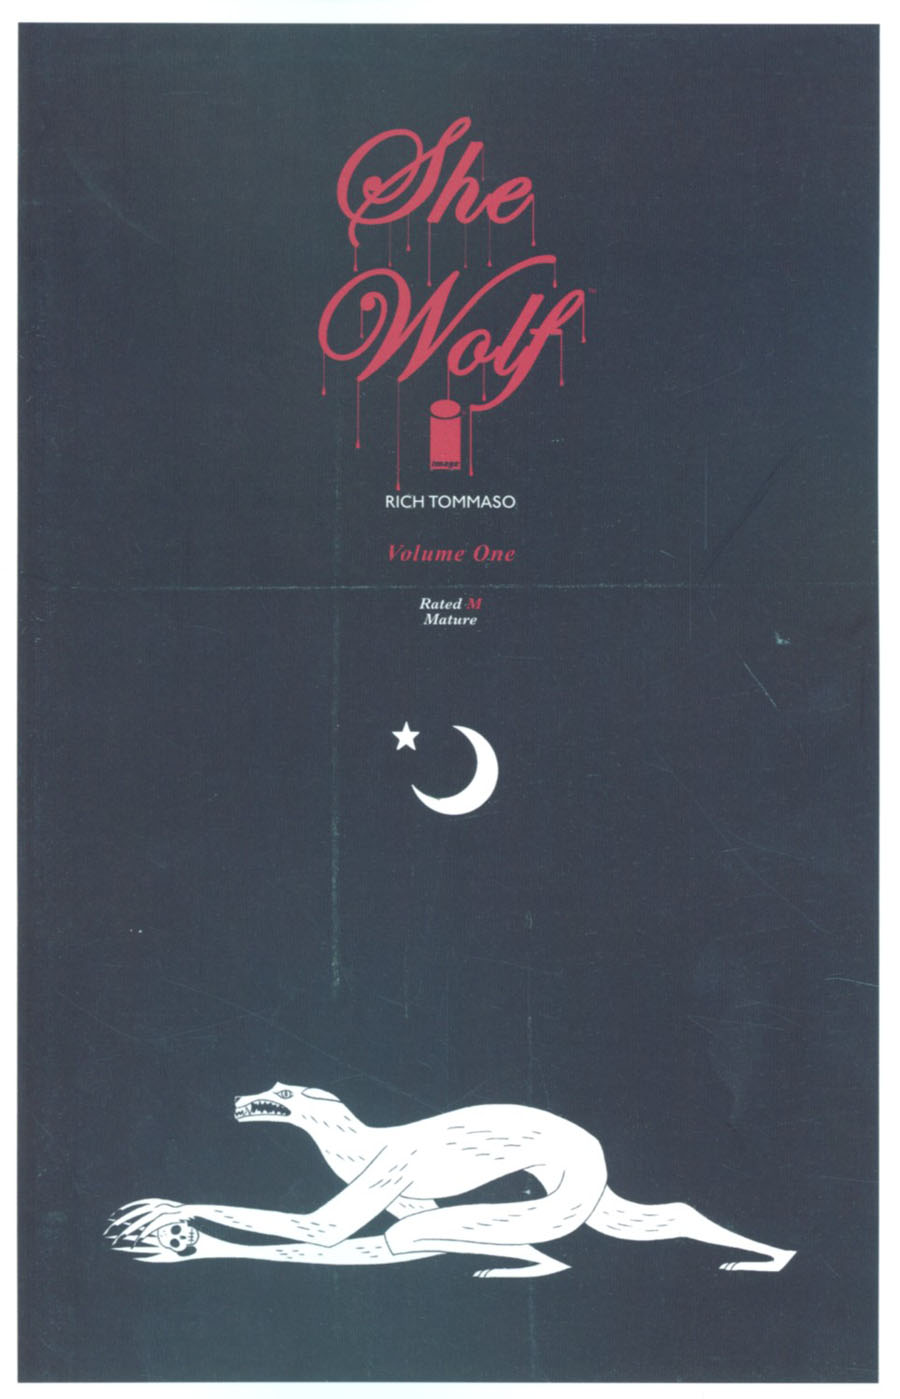 She Wolf Vol 1 TP